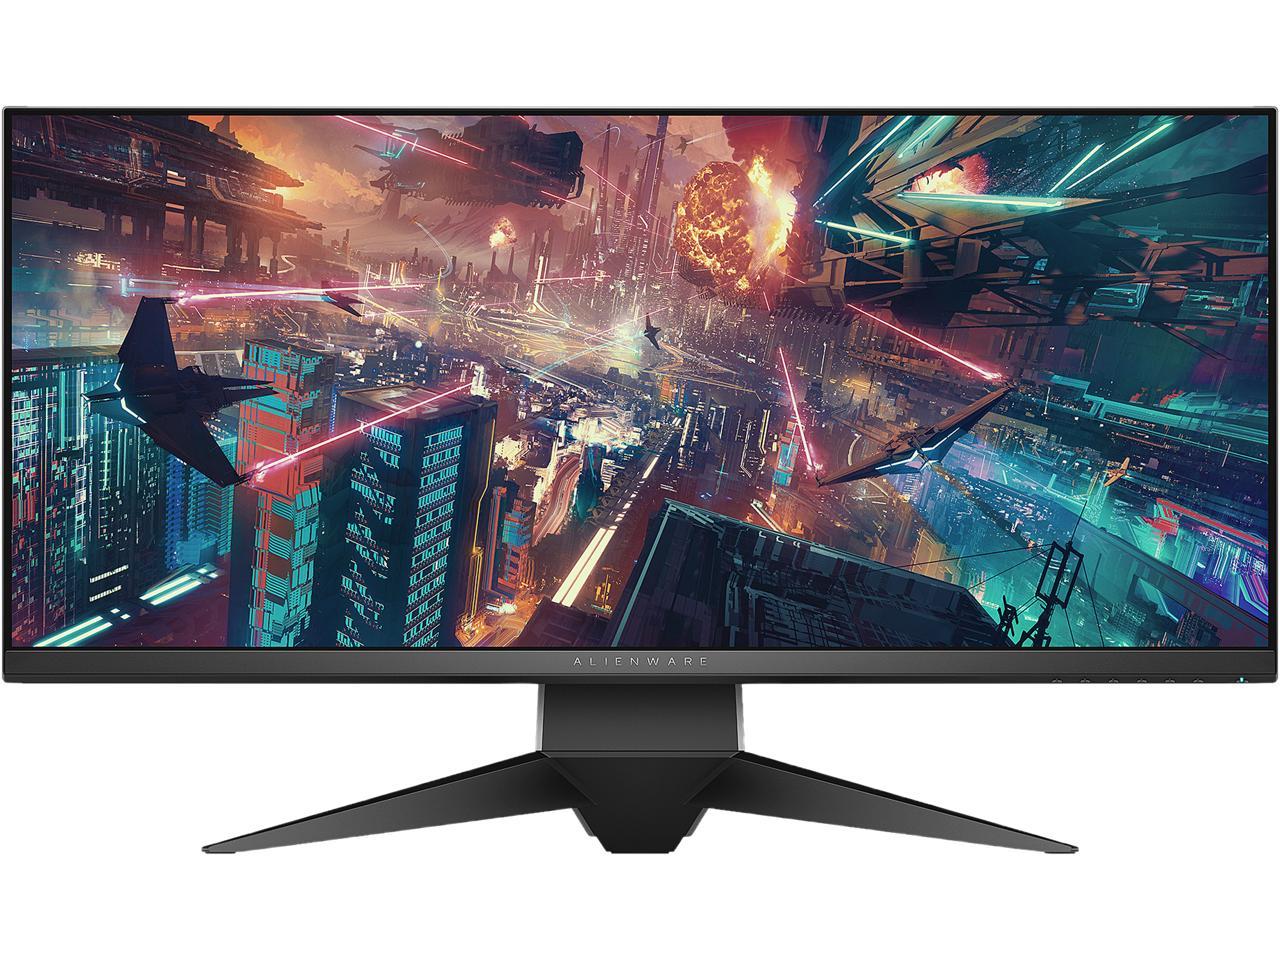 Dell Alienware AW3418HW 34″ (2560 x 1080) 160Hz (overlocked) WFHD Gaming Monitor